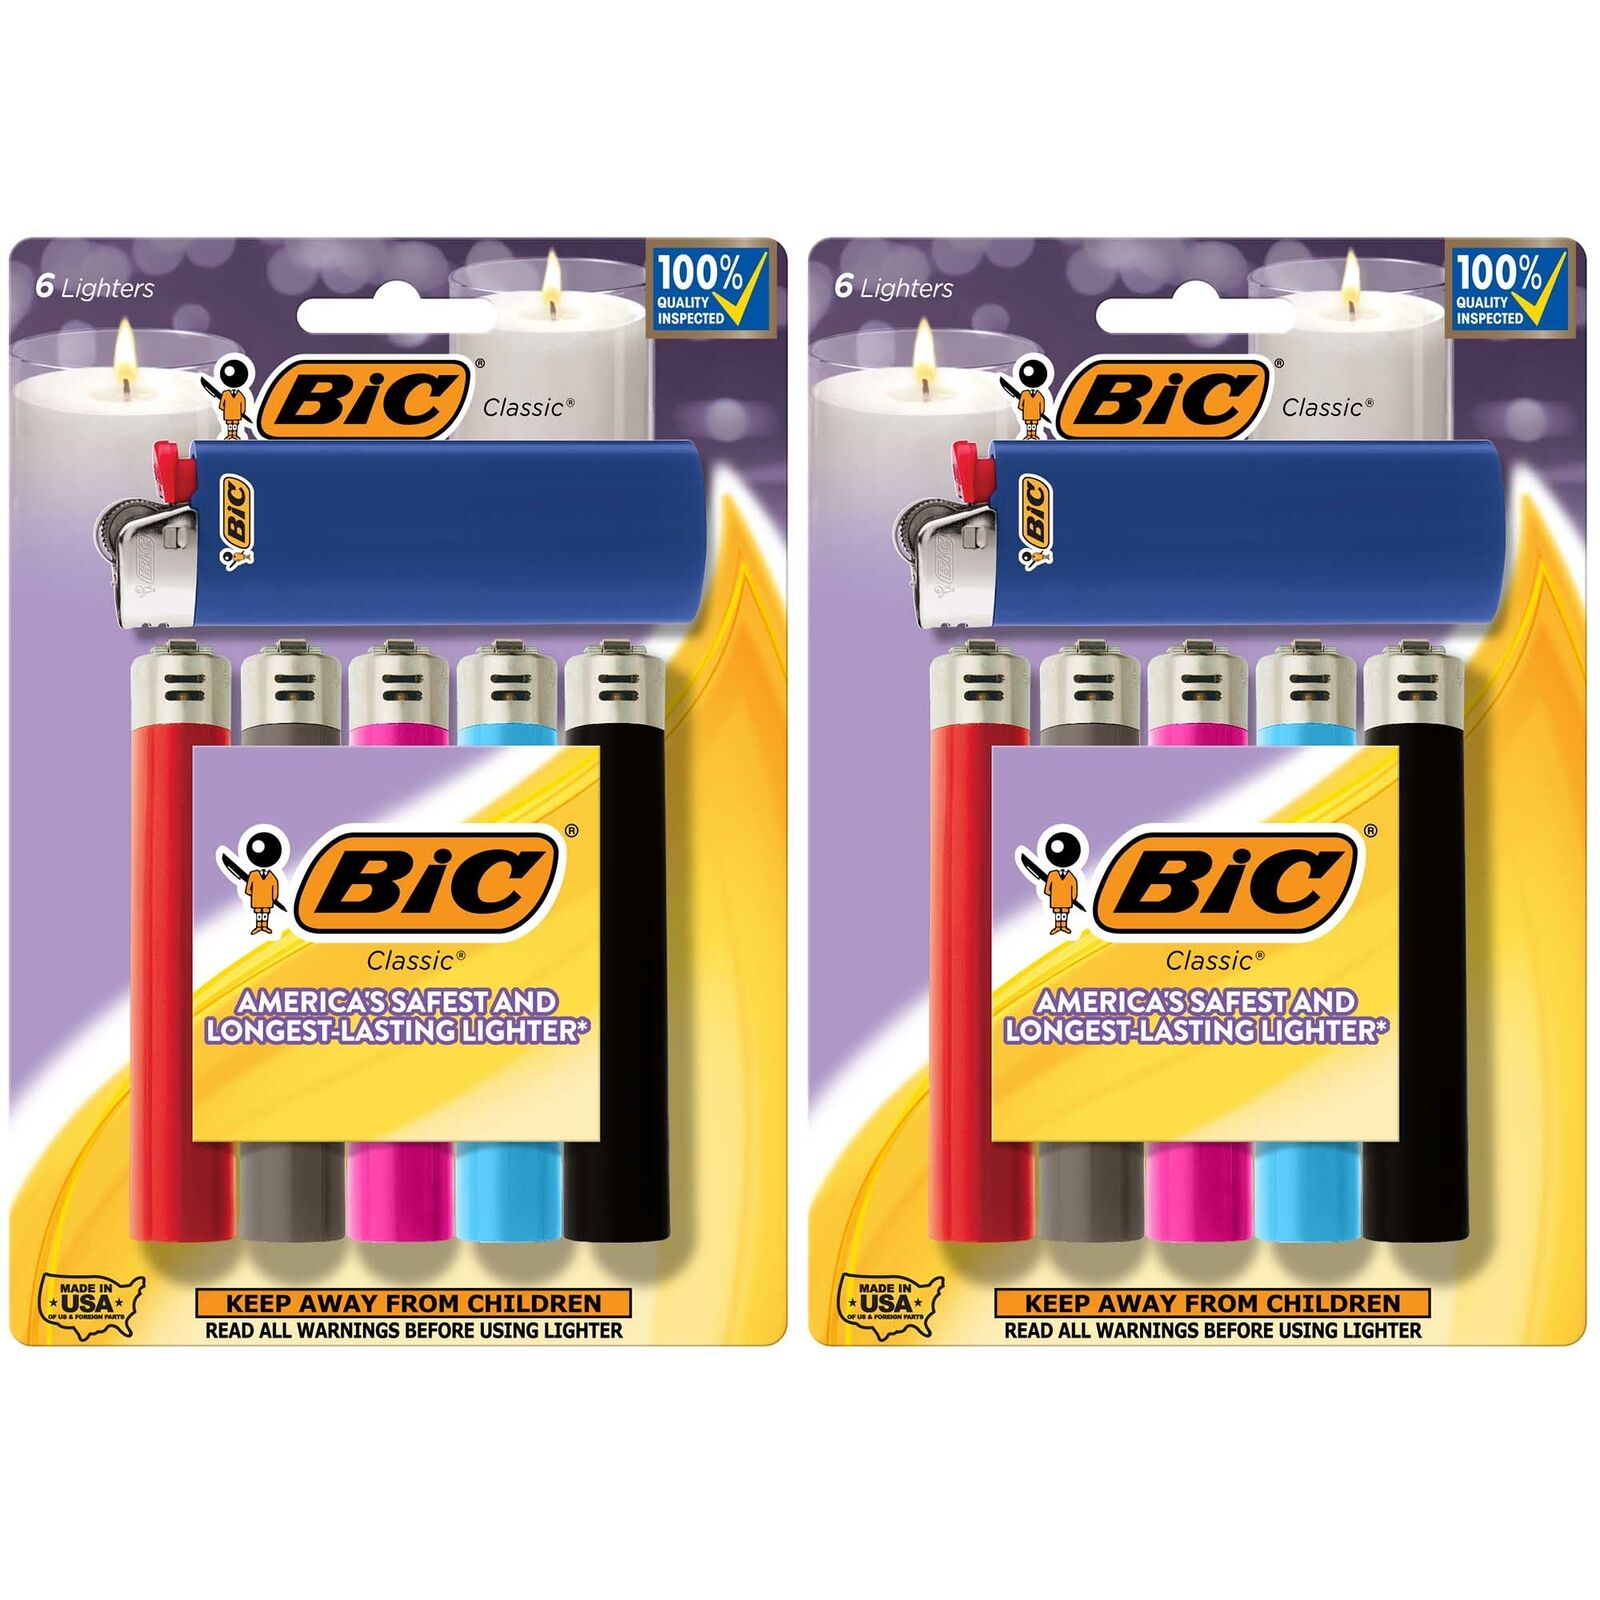 BIC Classic Lighter, Assorted Colors, 12-Pack Pocket Lighter (packaging may